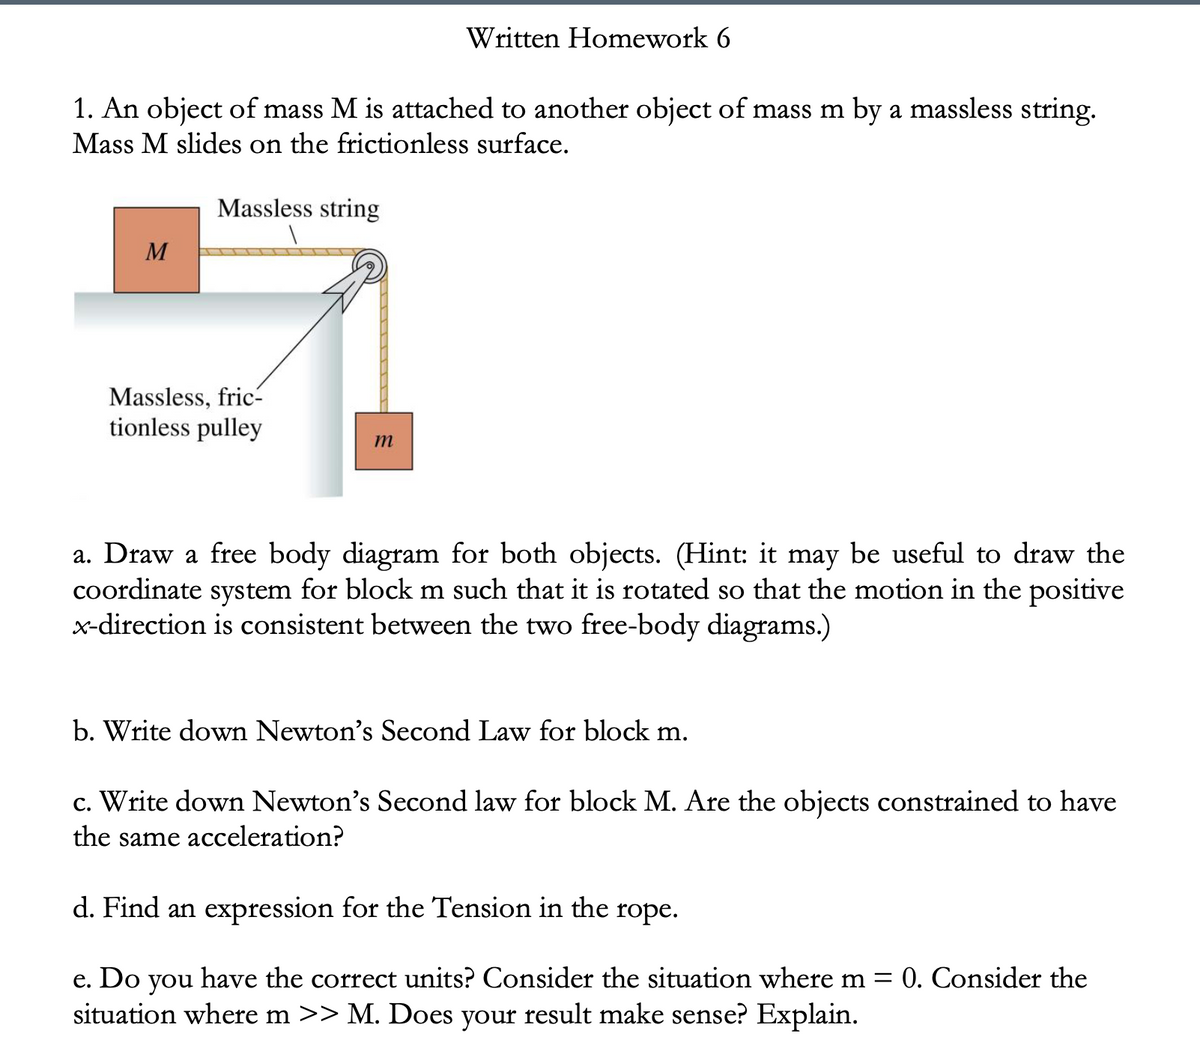 Written Homework 6
1. An object of mass M is attached to another object of mass m by a massless string.
Mass M slides on the frictionless surface.
Massless string
M
Massless, fric-
tionless pulley
a. Draw a free body diagram for both objects. (Hint: it may be useful to draw the
coordinate system for block m such that it is rotated so that the motion in the positive
x-direction is consistent between the two free-body diagrams.)
b. Write down Newton's Second Law for block m.
c. Write down Newton's Second law for block M. Are the objects constrained to have
the same acceleration?
d. Find an expression for the Tension in the rope.
e. Do
situation where m >> M. Does your result make sense? Explain.
have the correct units? Consider the situation where m = 0. Consider the
you
